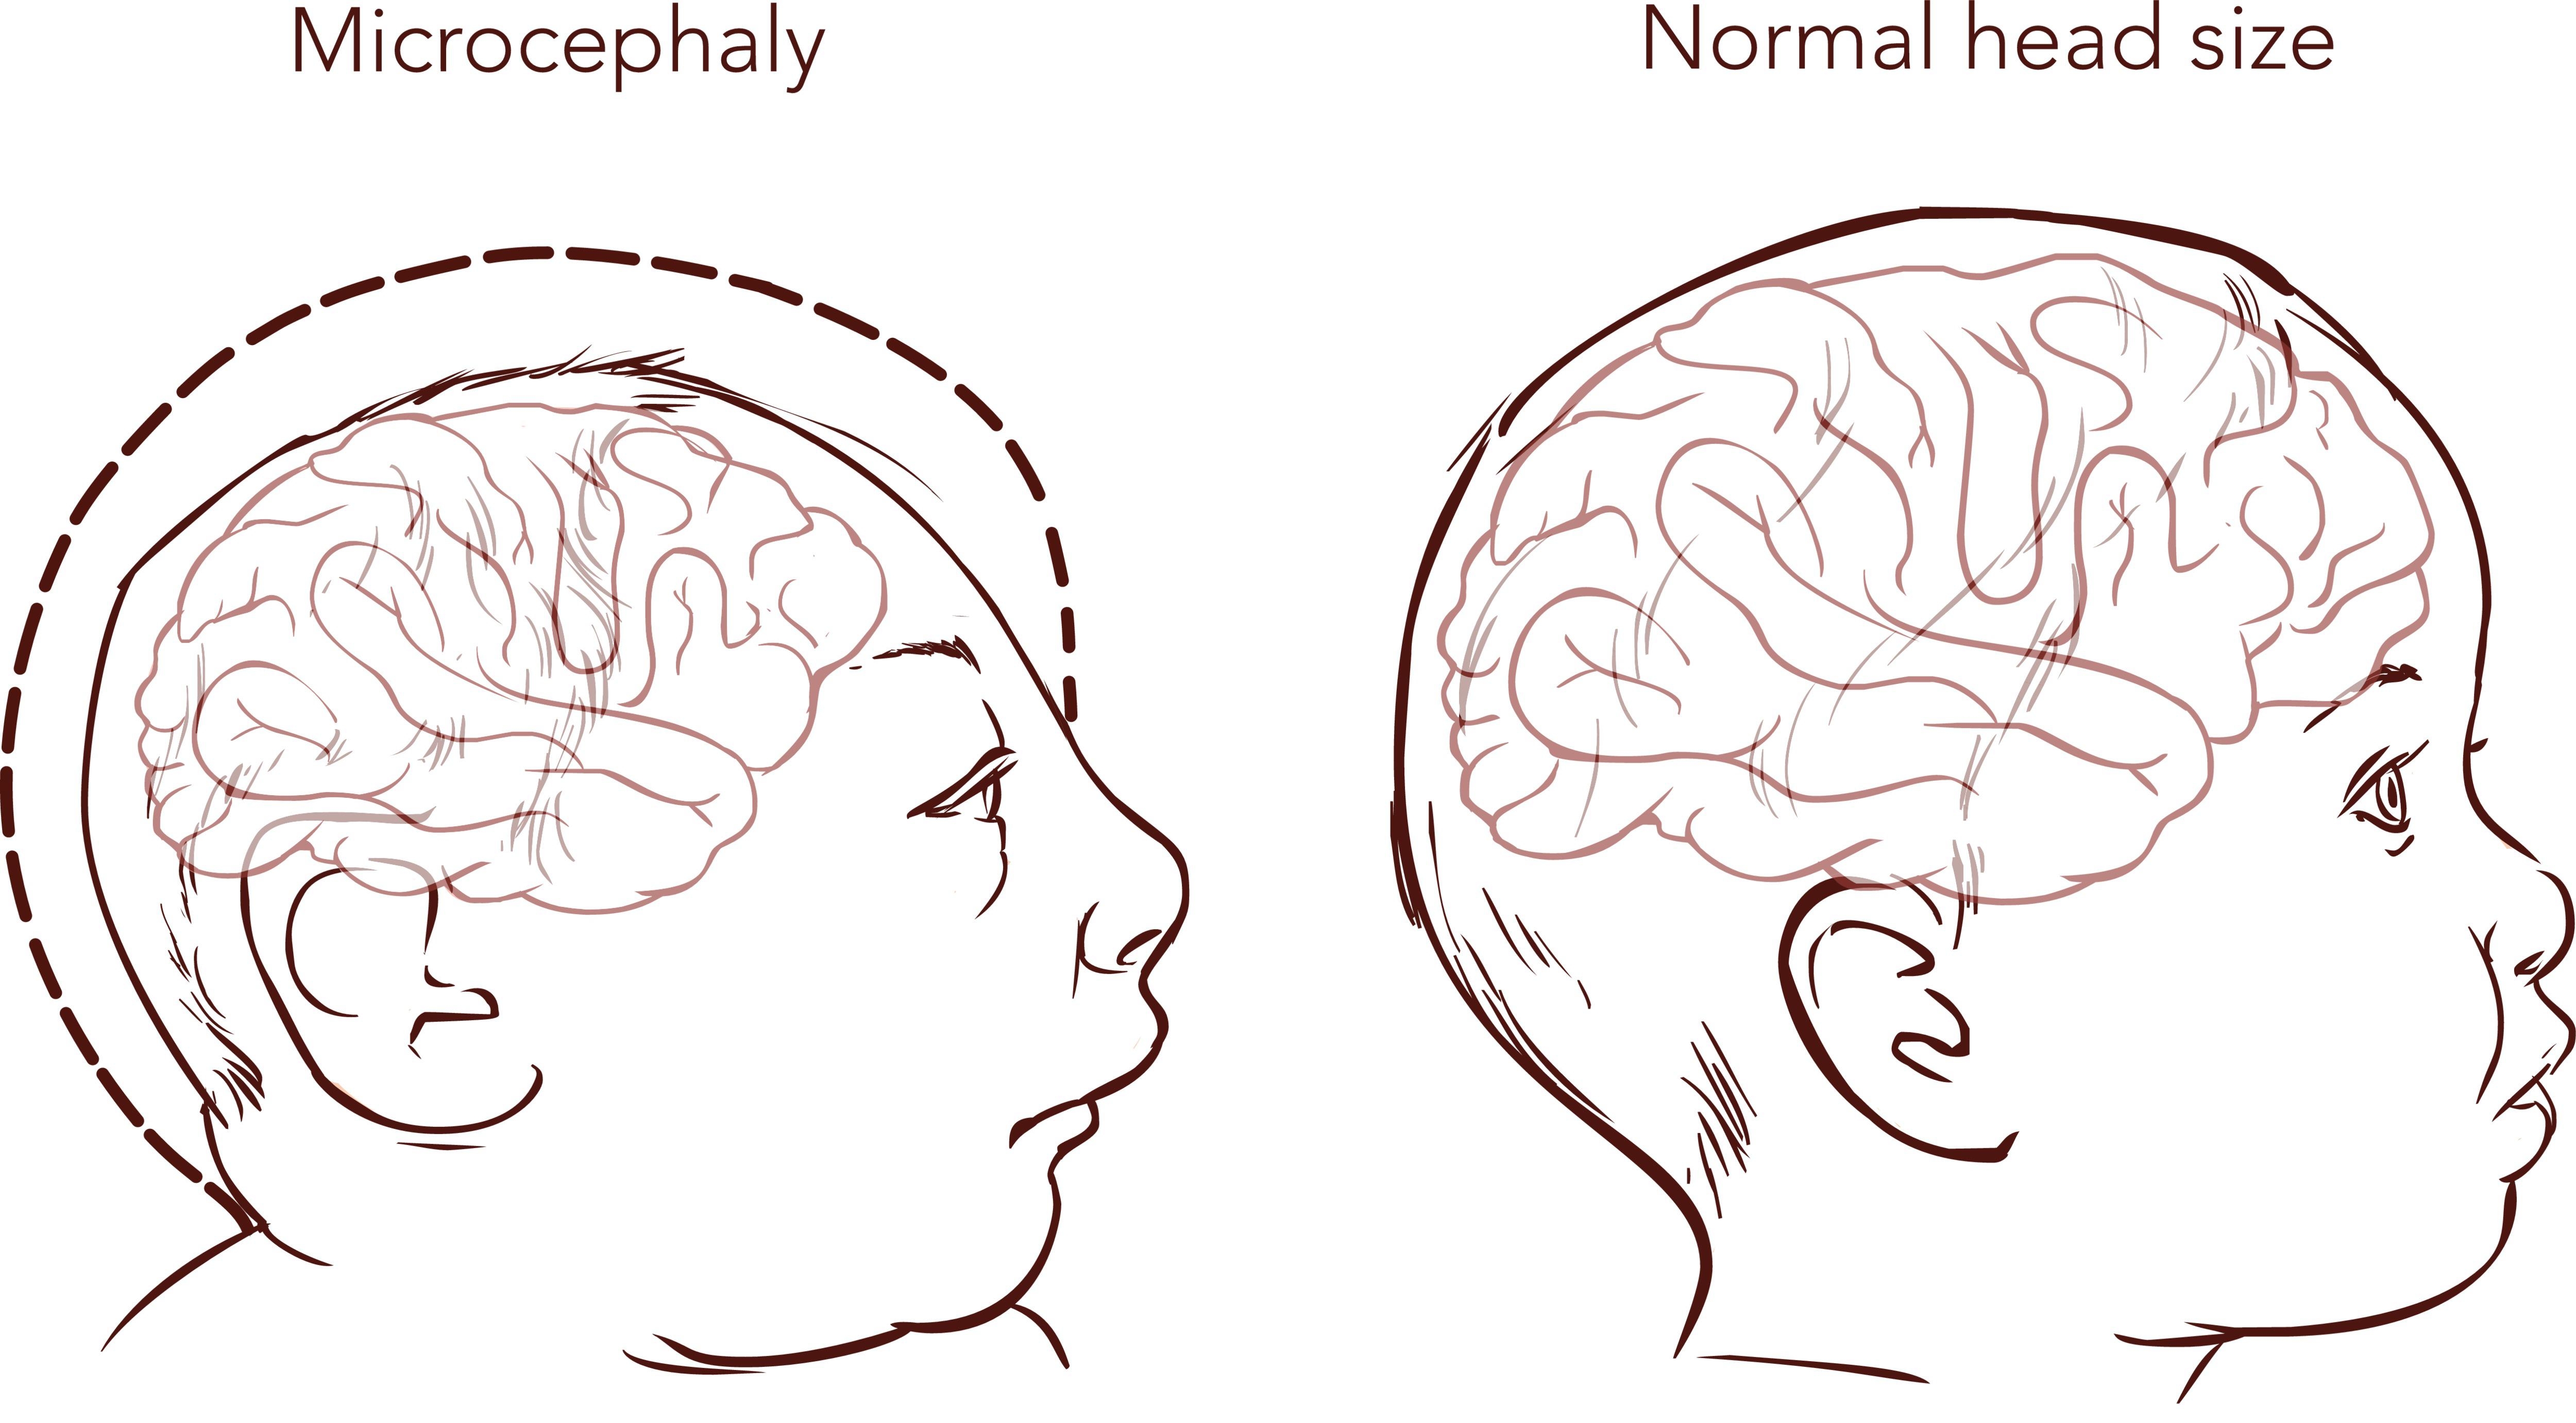 Small head size is the main symptom of the microcephaly.